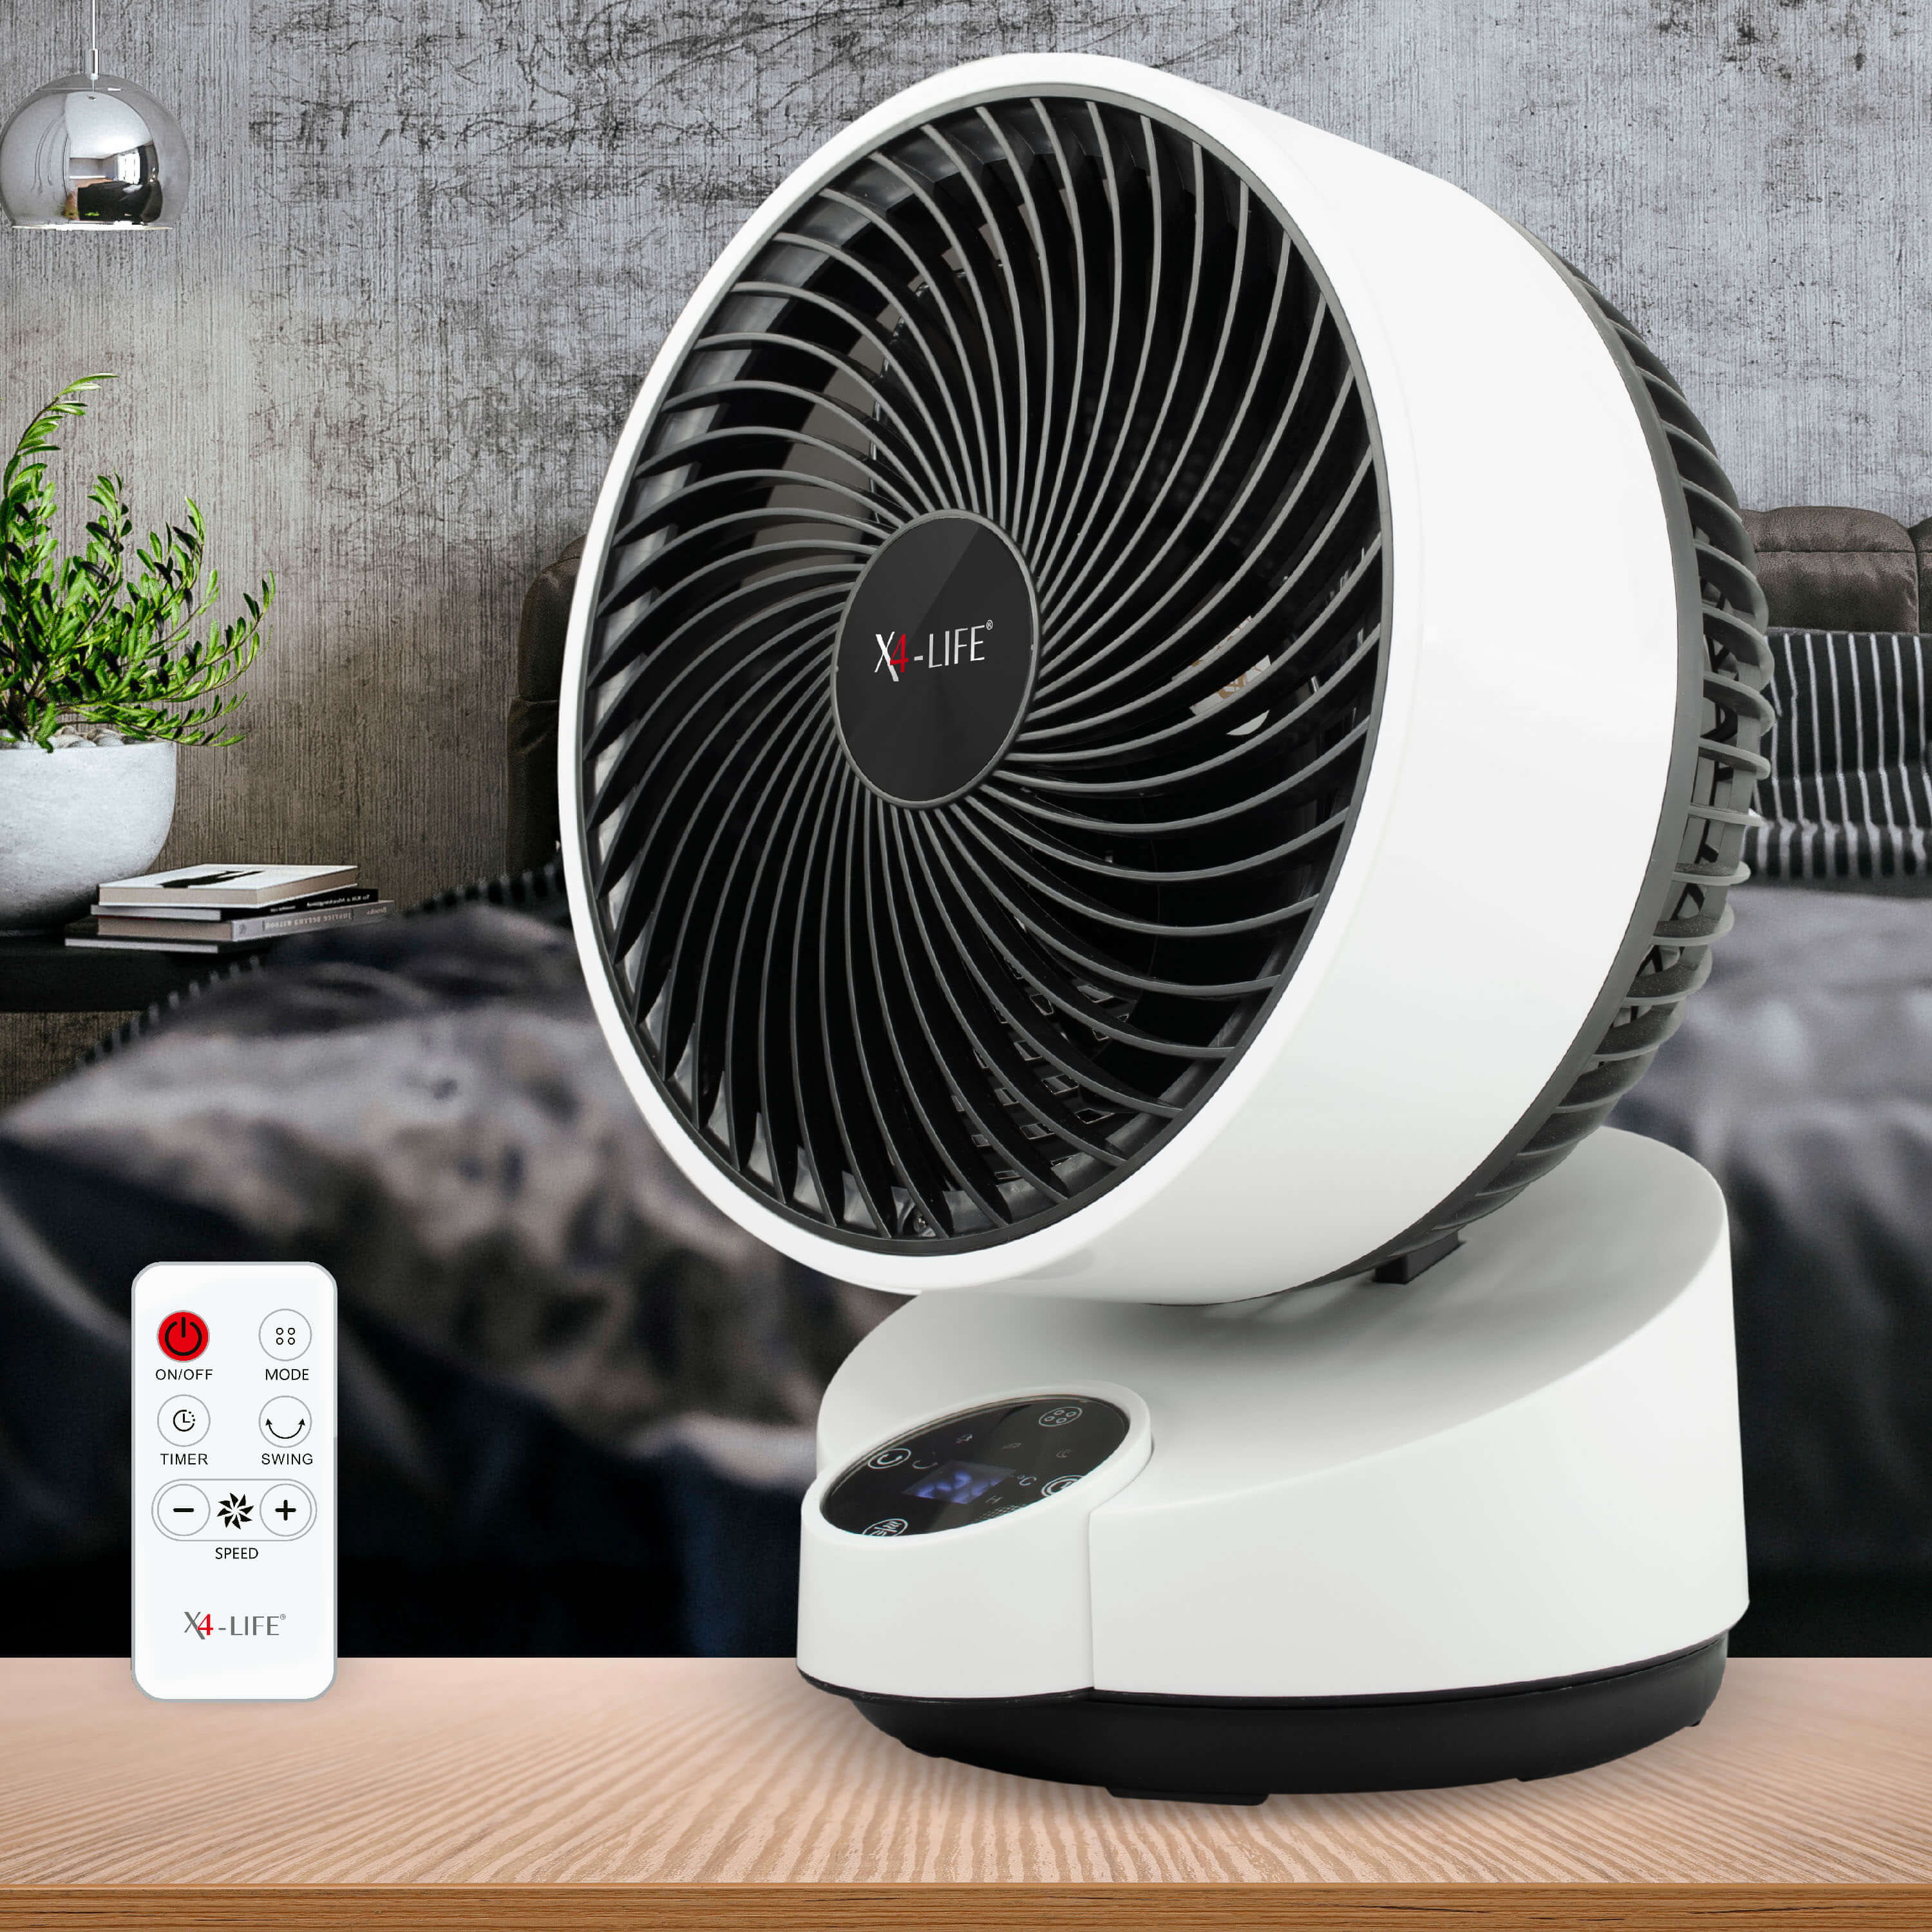 Fan Pinguin DX, a fan with touch control, timer, and remote control, featuring oscillation for wider air distribution, quiet operation, and energy efficiency